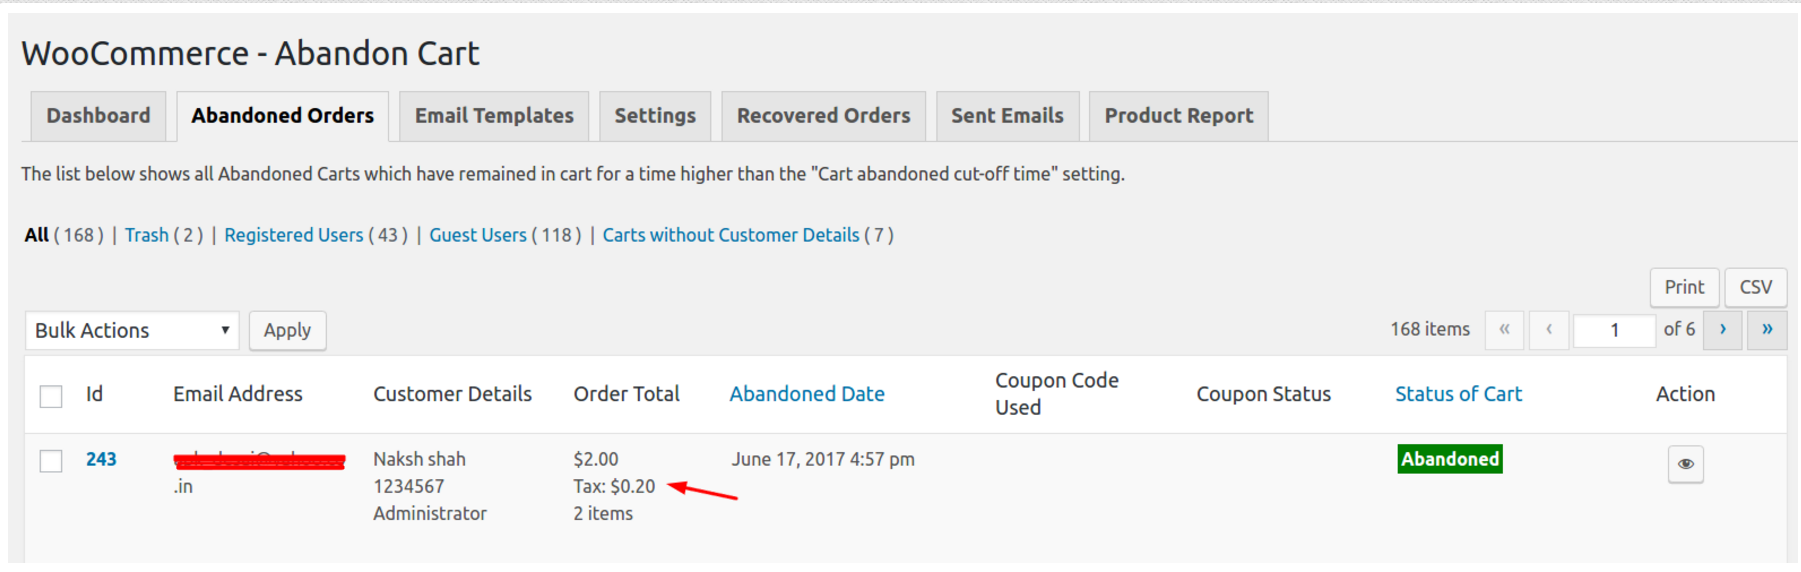 Exlude tax setting - Upcoming Release v5.0 of Abandoned Cart Pro for WooCommerce